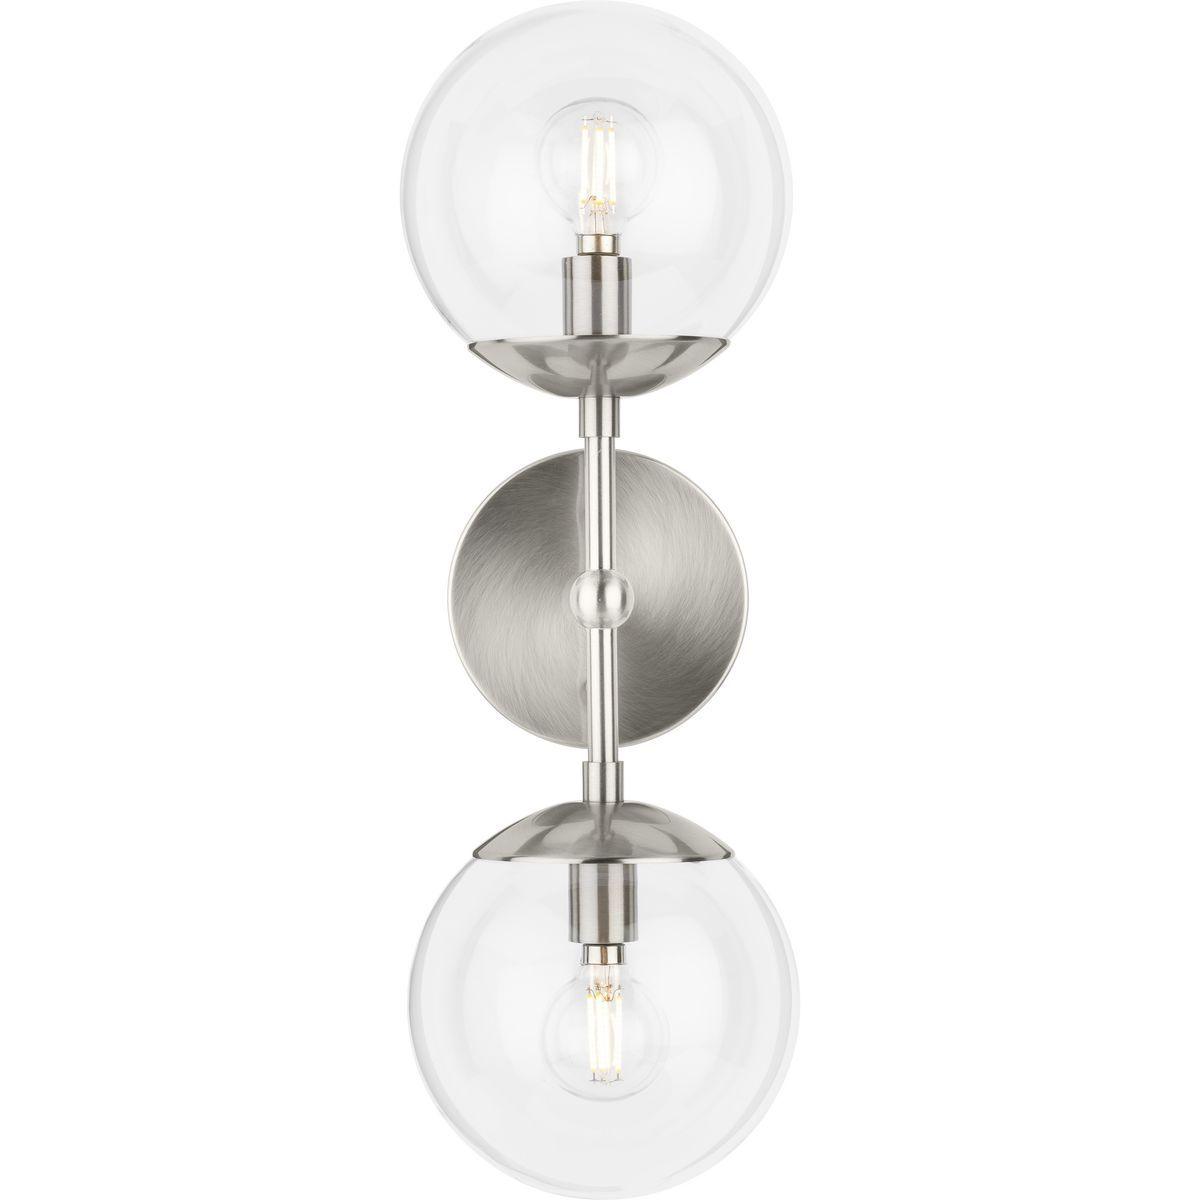 Atwell 18 in. 2 Lights Armed Sconce